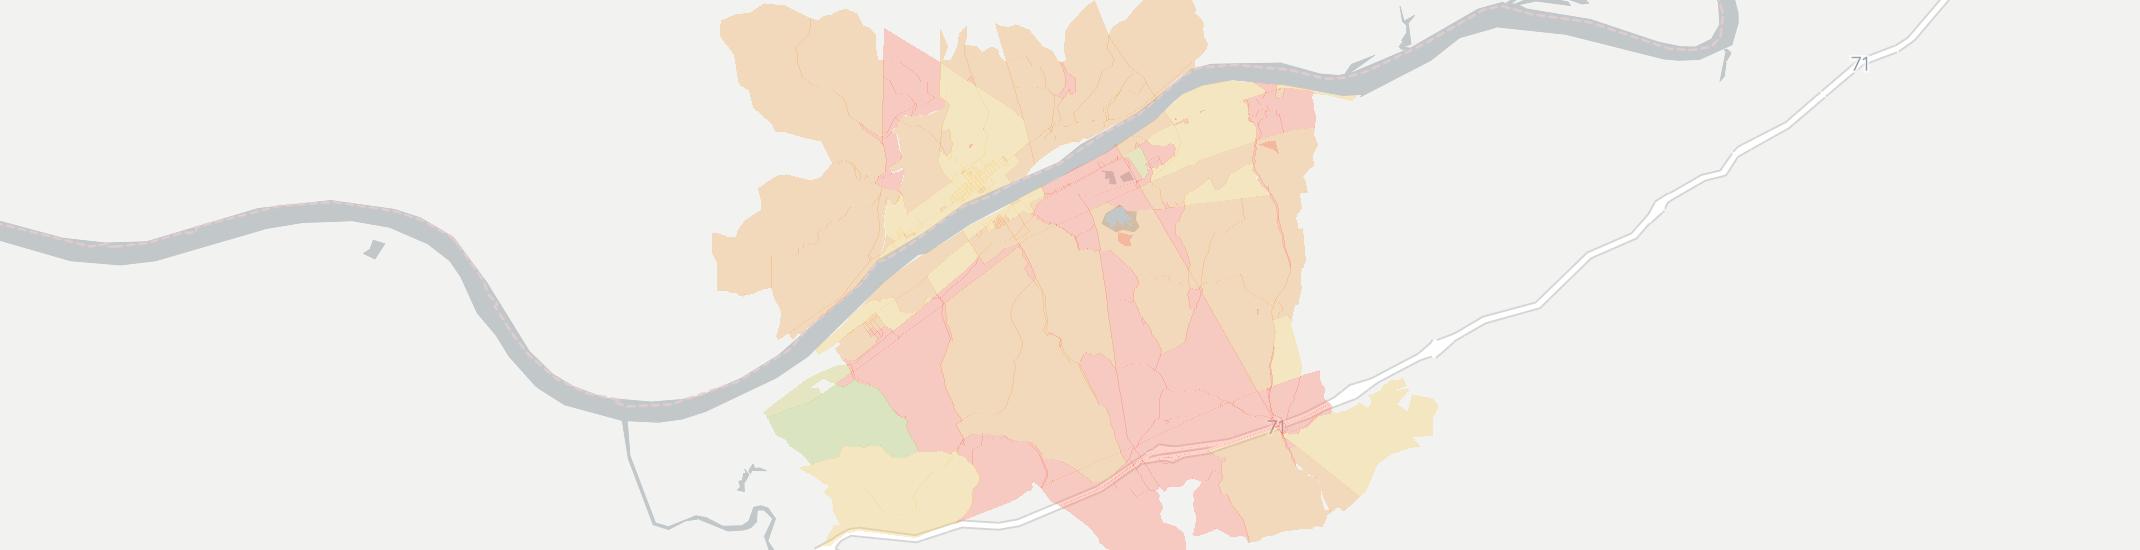 Ghent Internet Competition Map. Click for interactive map